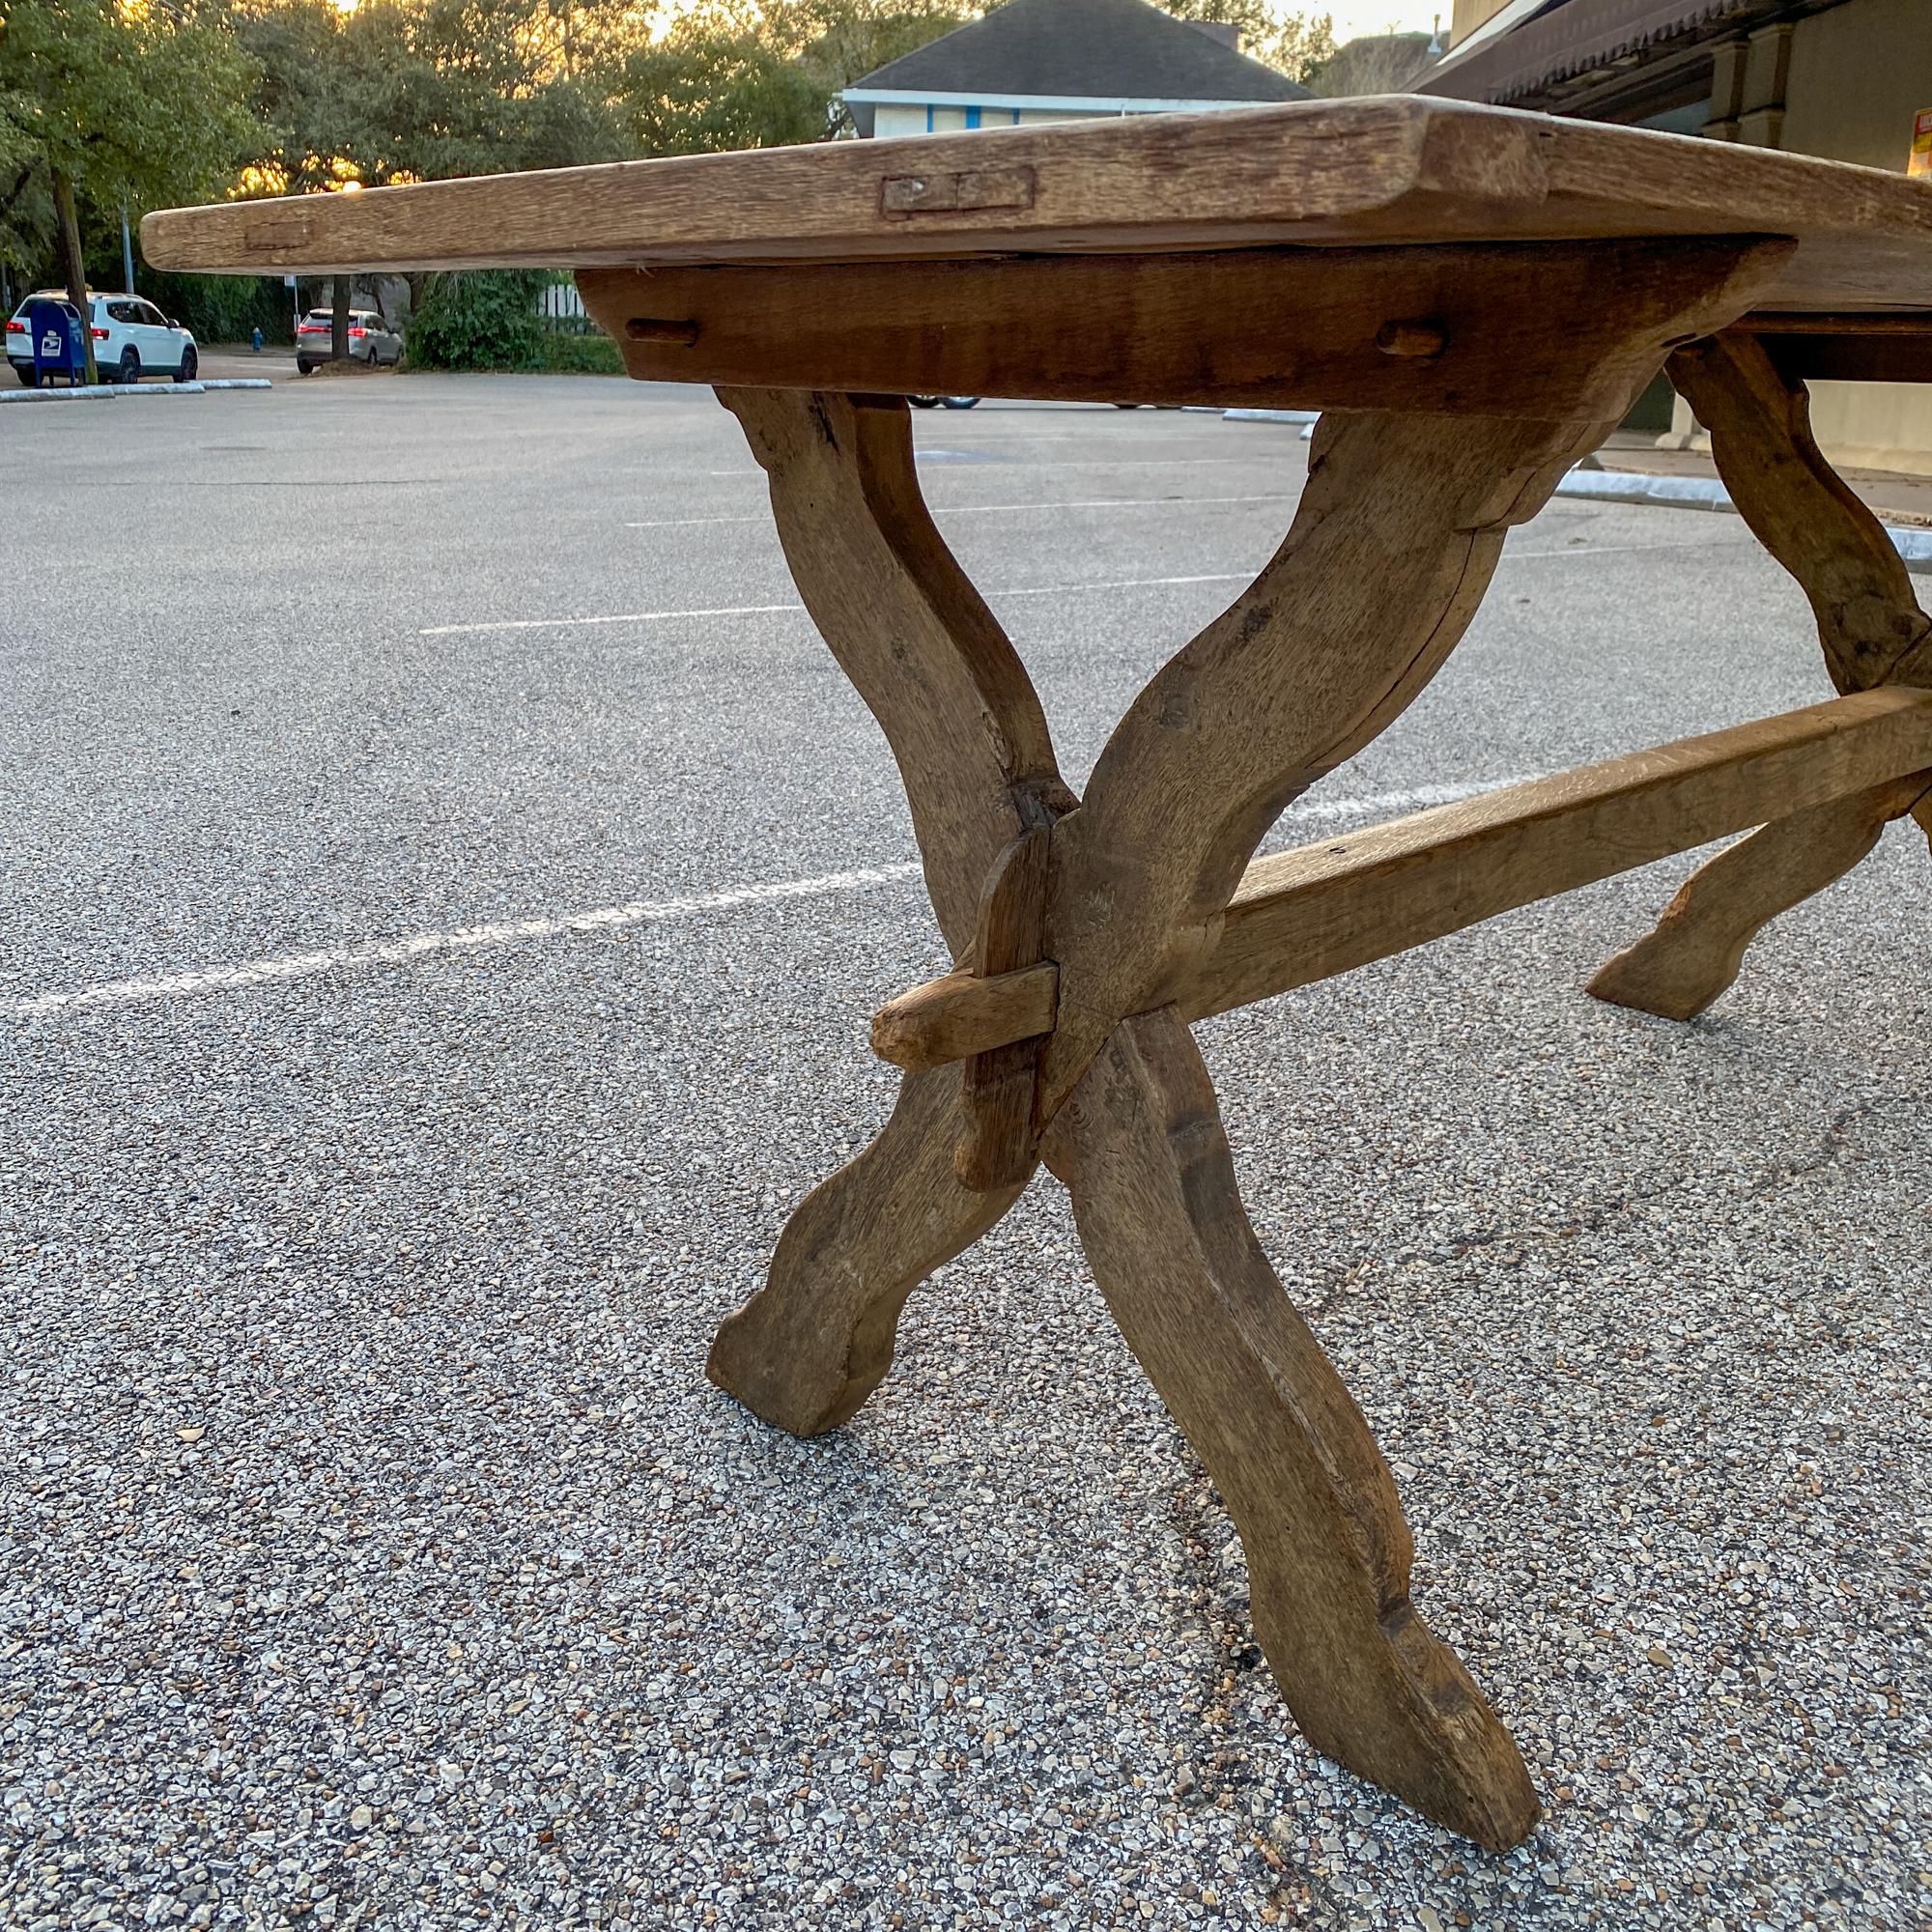 This 1920s French oak trestle-style farm table features an X-shaped base with a center stretcher. This piece is crafted with wooden pegs that hold everything together, allowing it to be disassembled completely and packed flat, making this an ideal